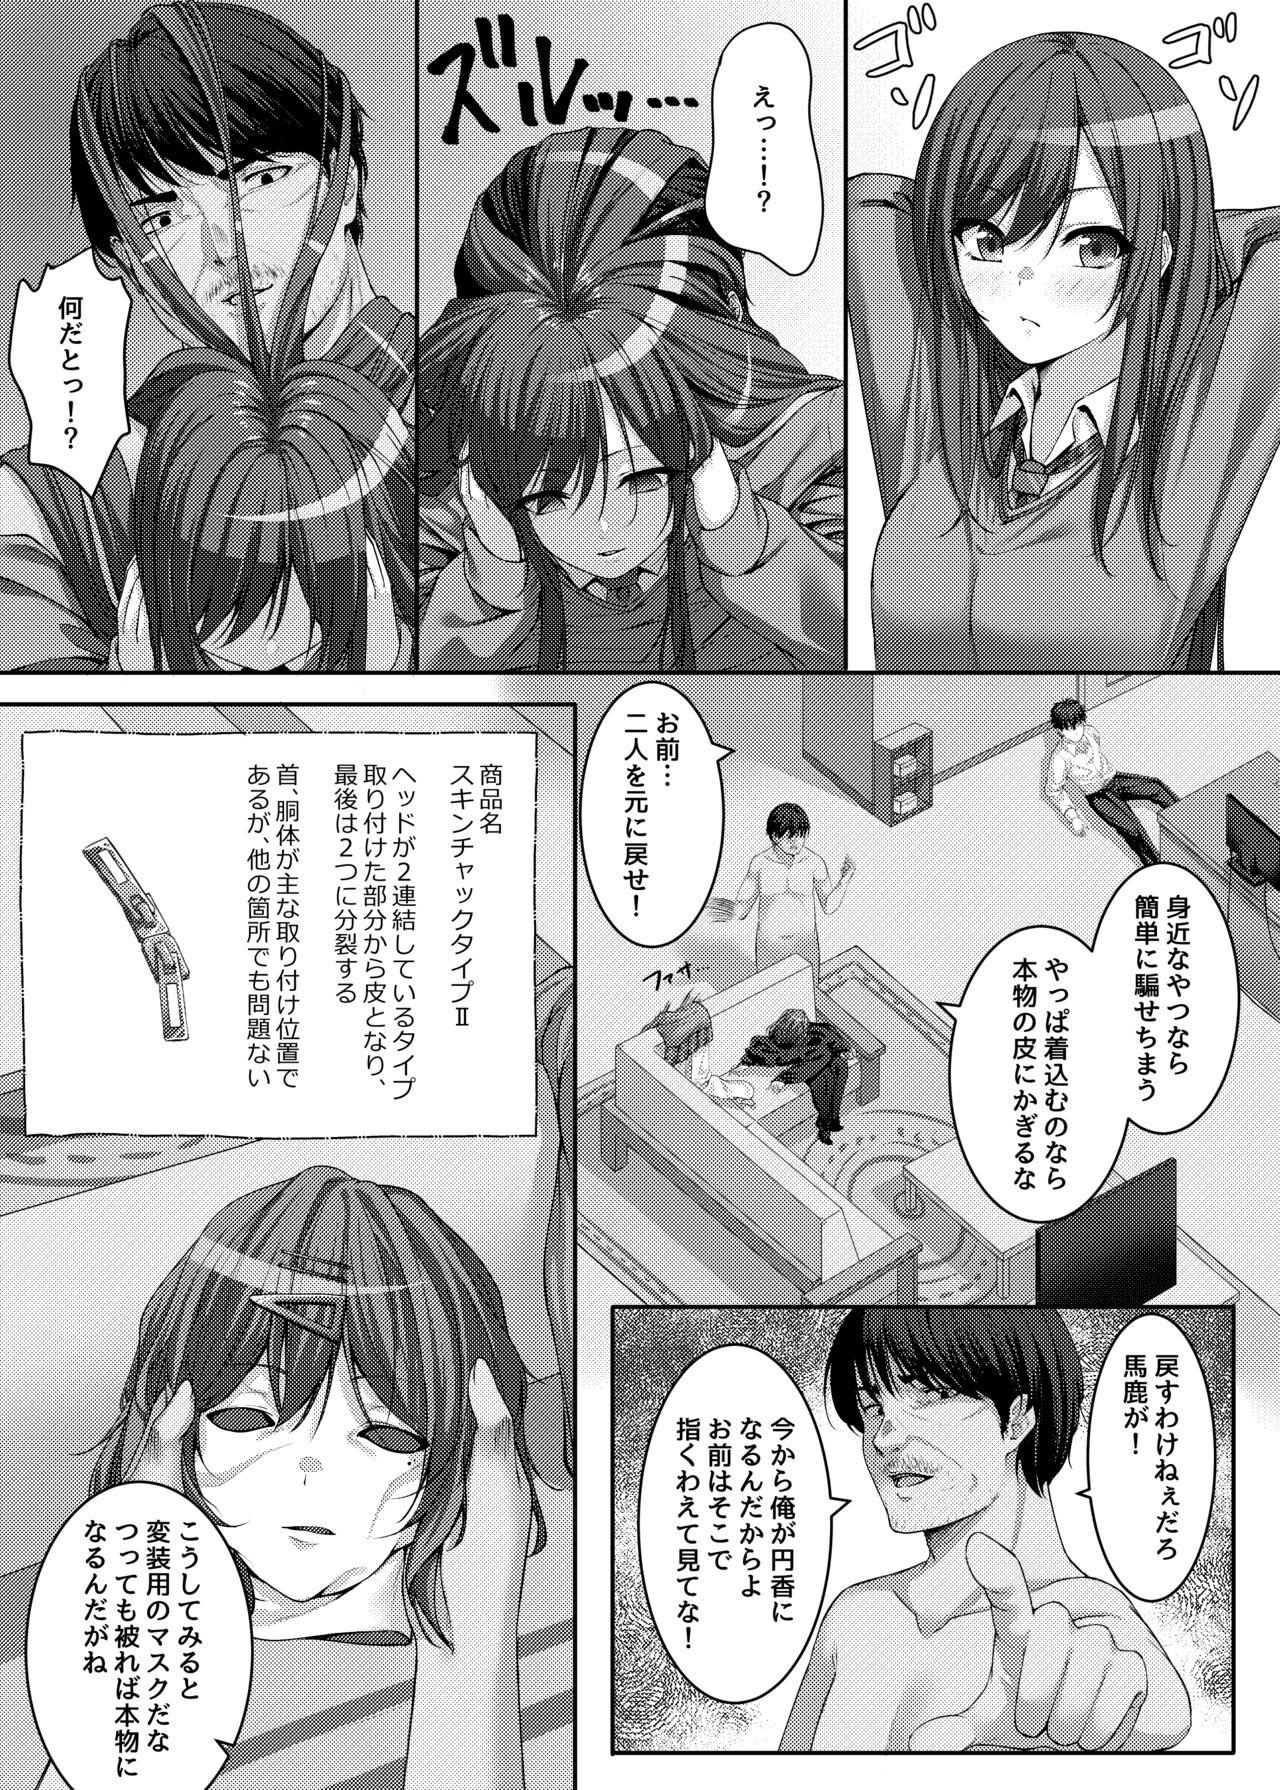 Asians 移り皮り～円香編～ - The idolmaster Gay Straight - Page 3